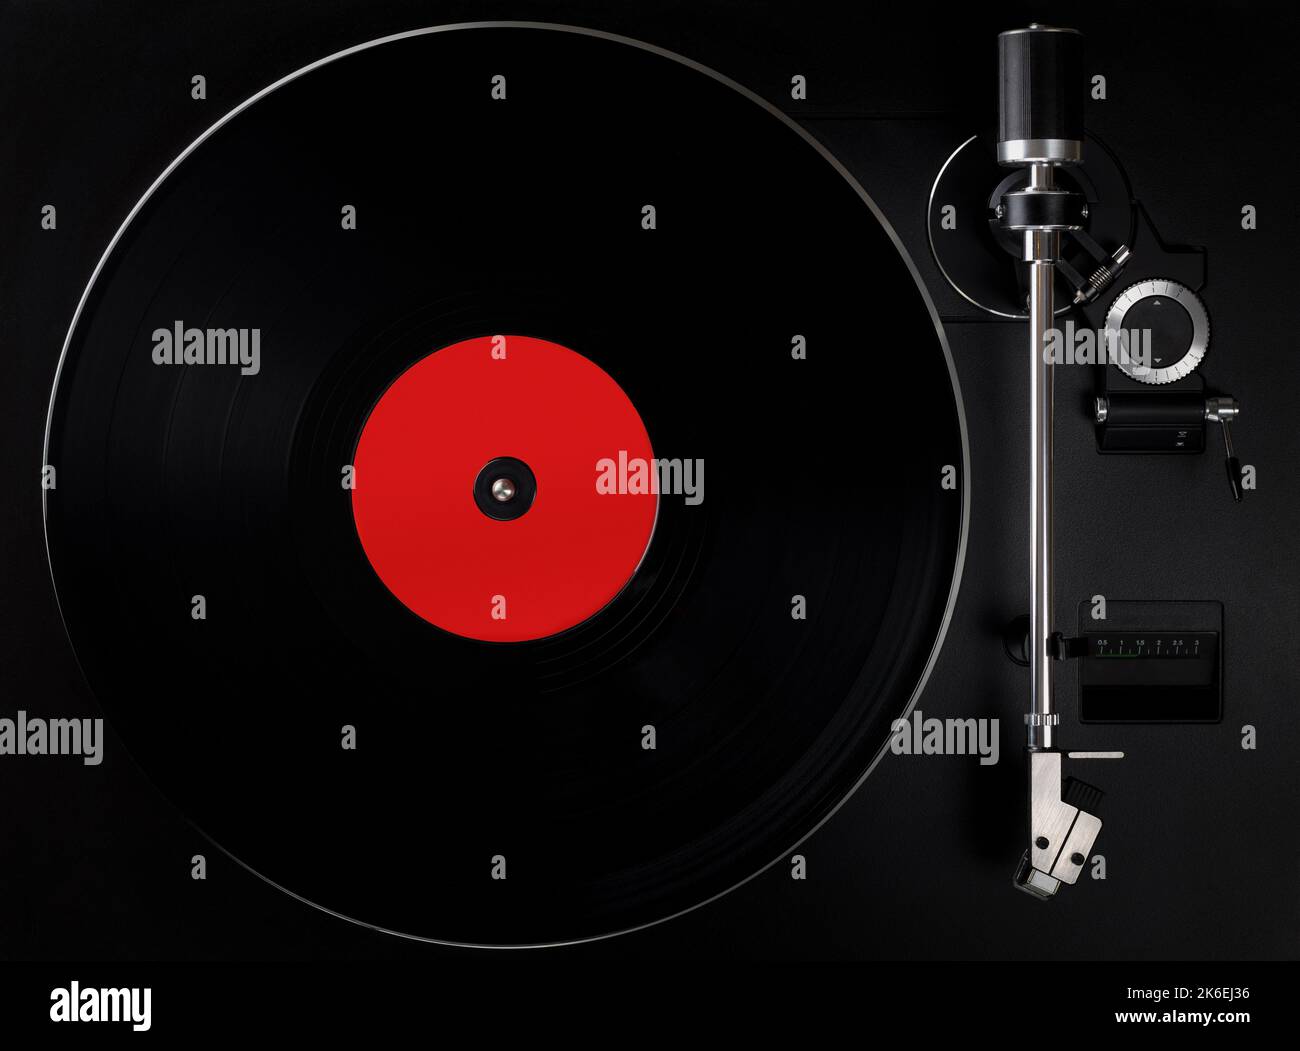 Black turntable playing vinyl record, blank label. Top view of old fashioned turntable. Stock Photo